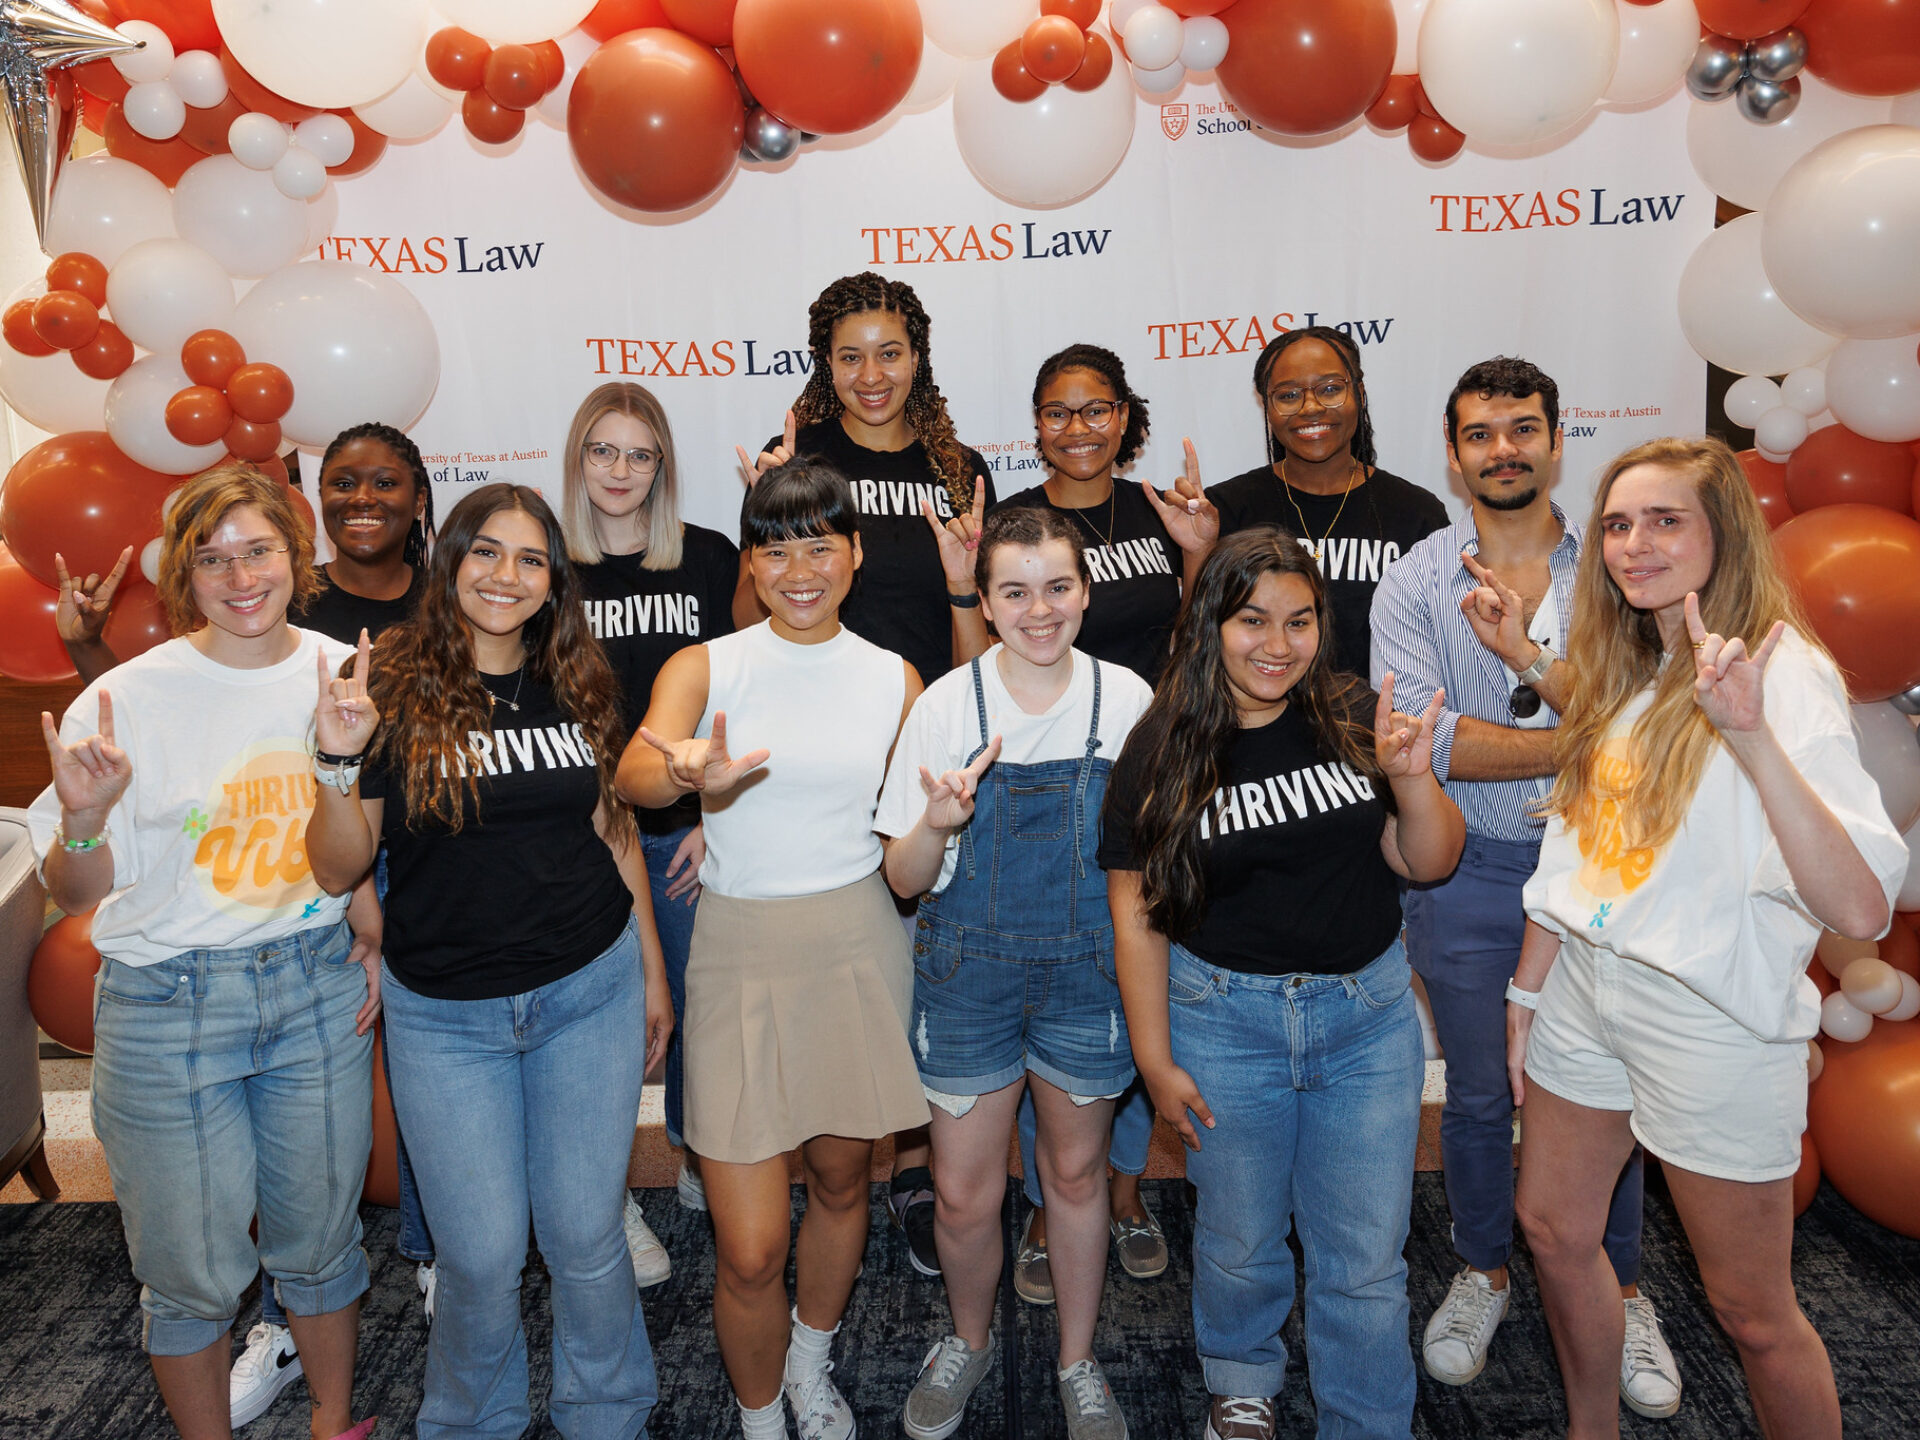 Group of students in front of Texas Law banner